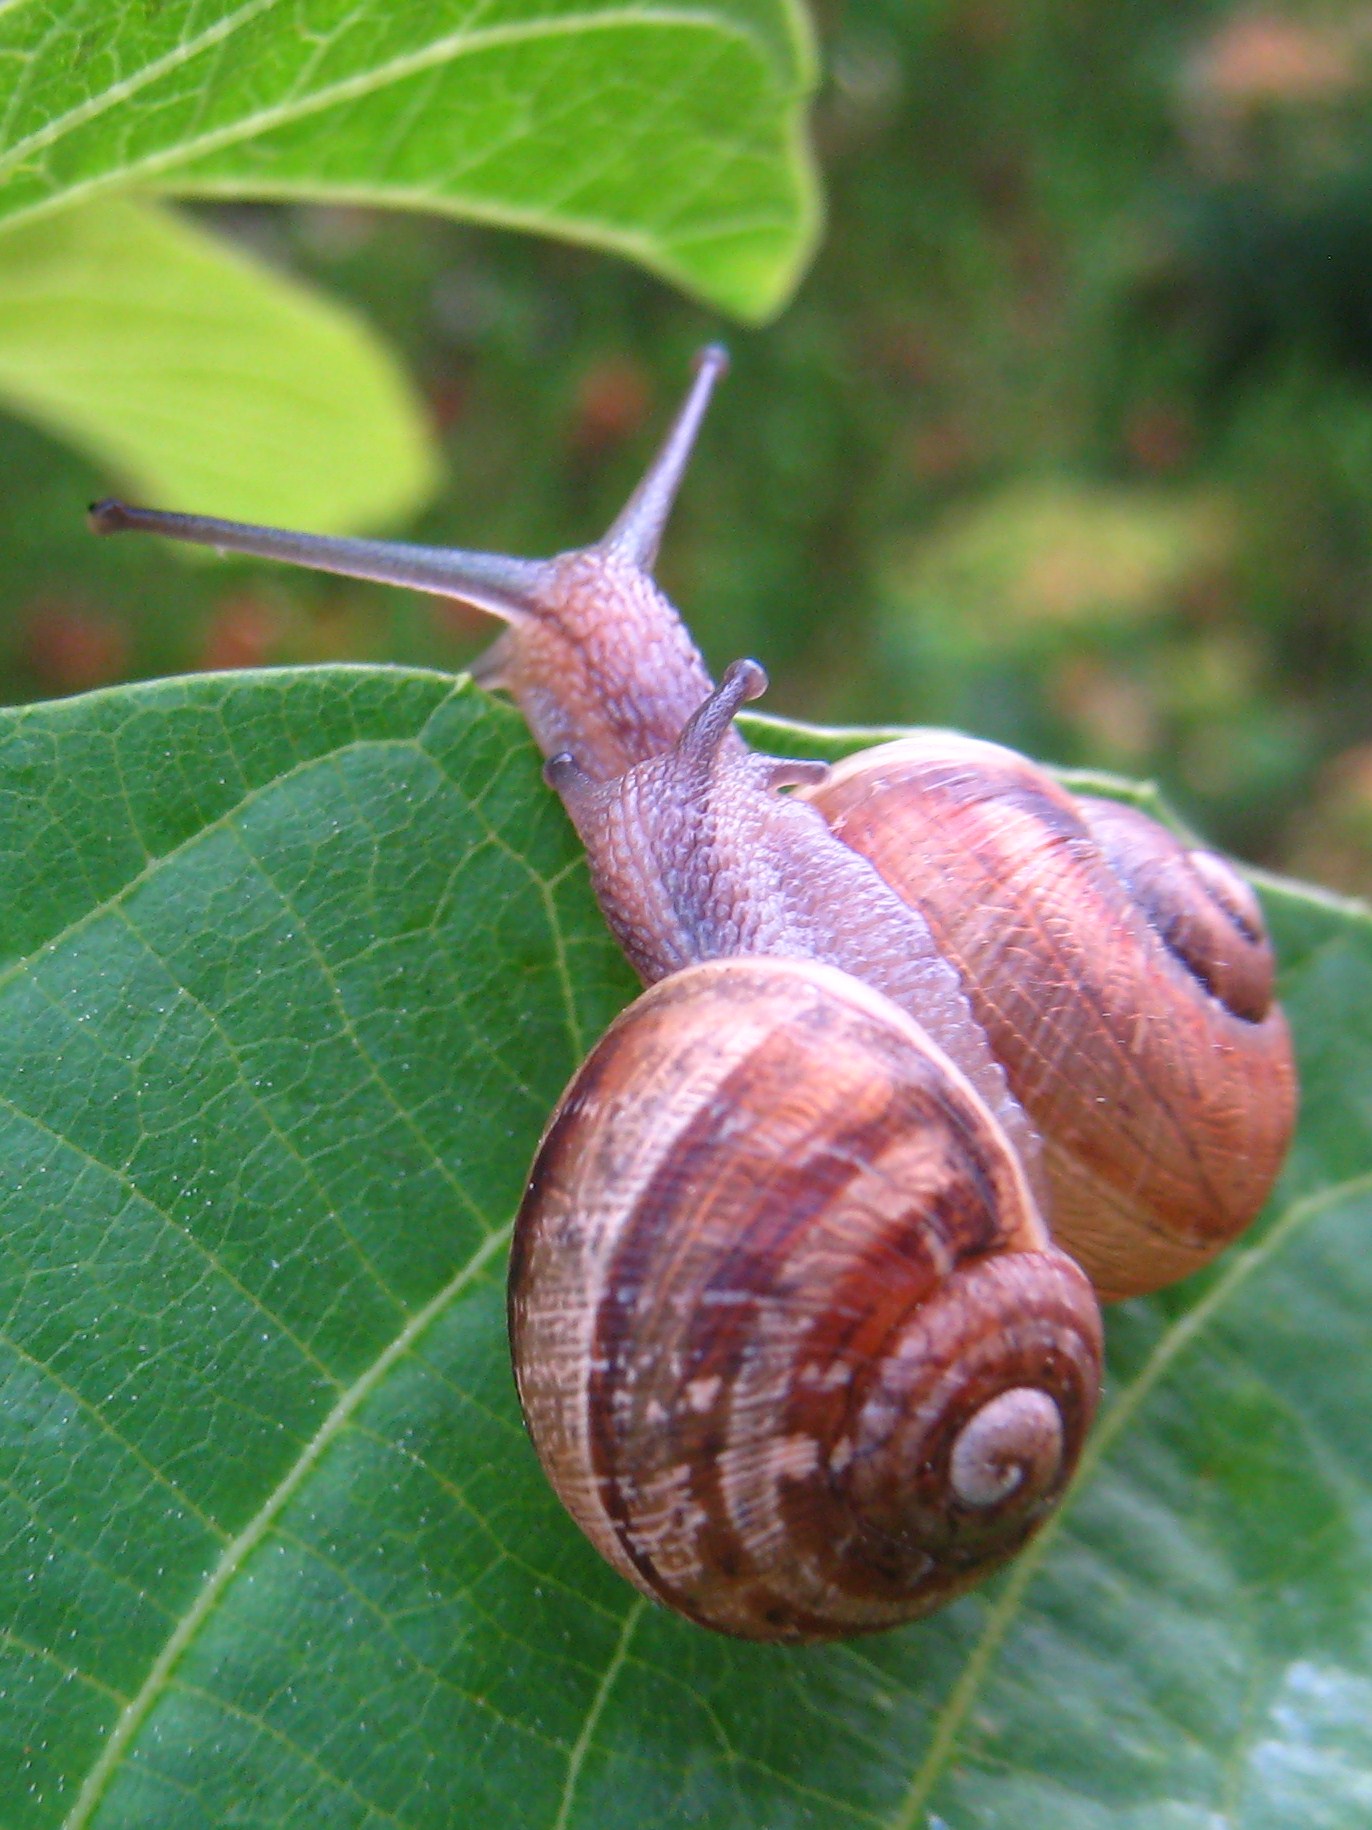 File Snuggly Snails Jpg Wikimedia Commons